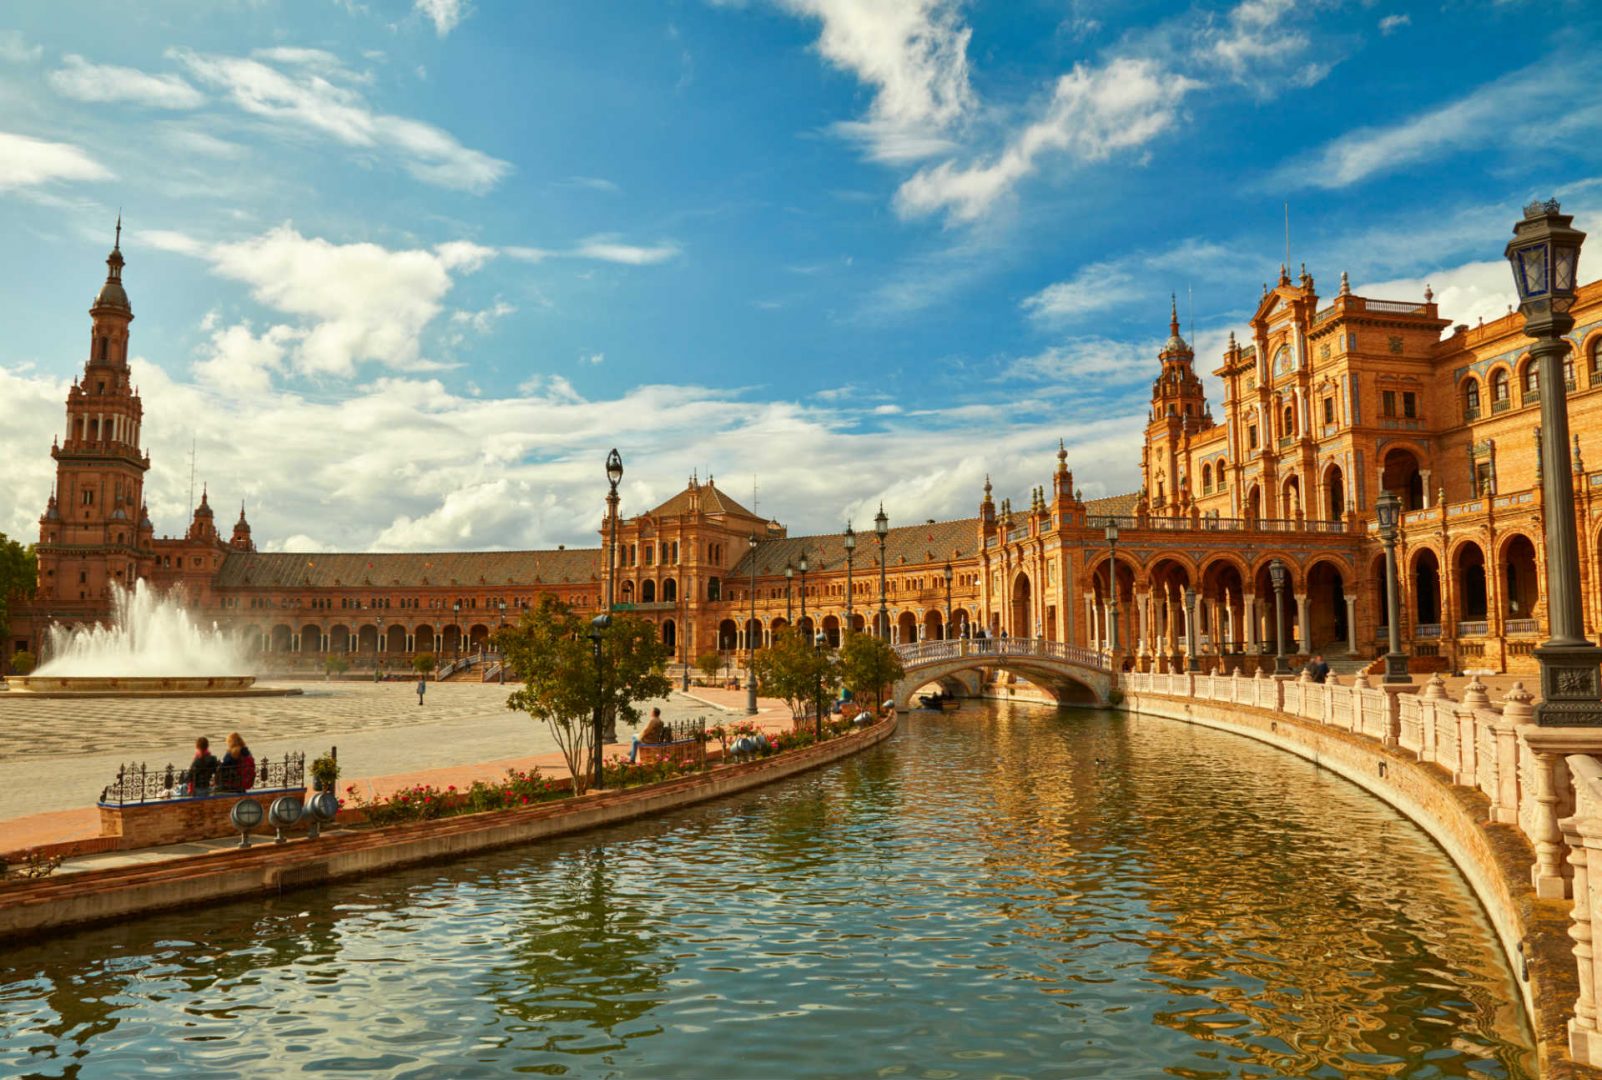 Seville, Andalusia, Spain